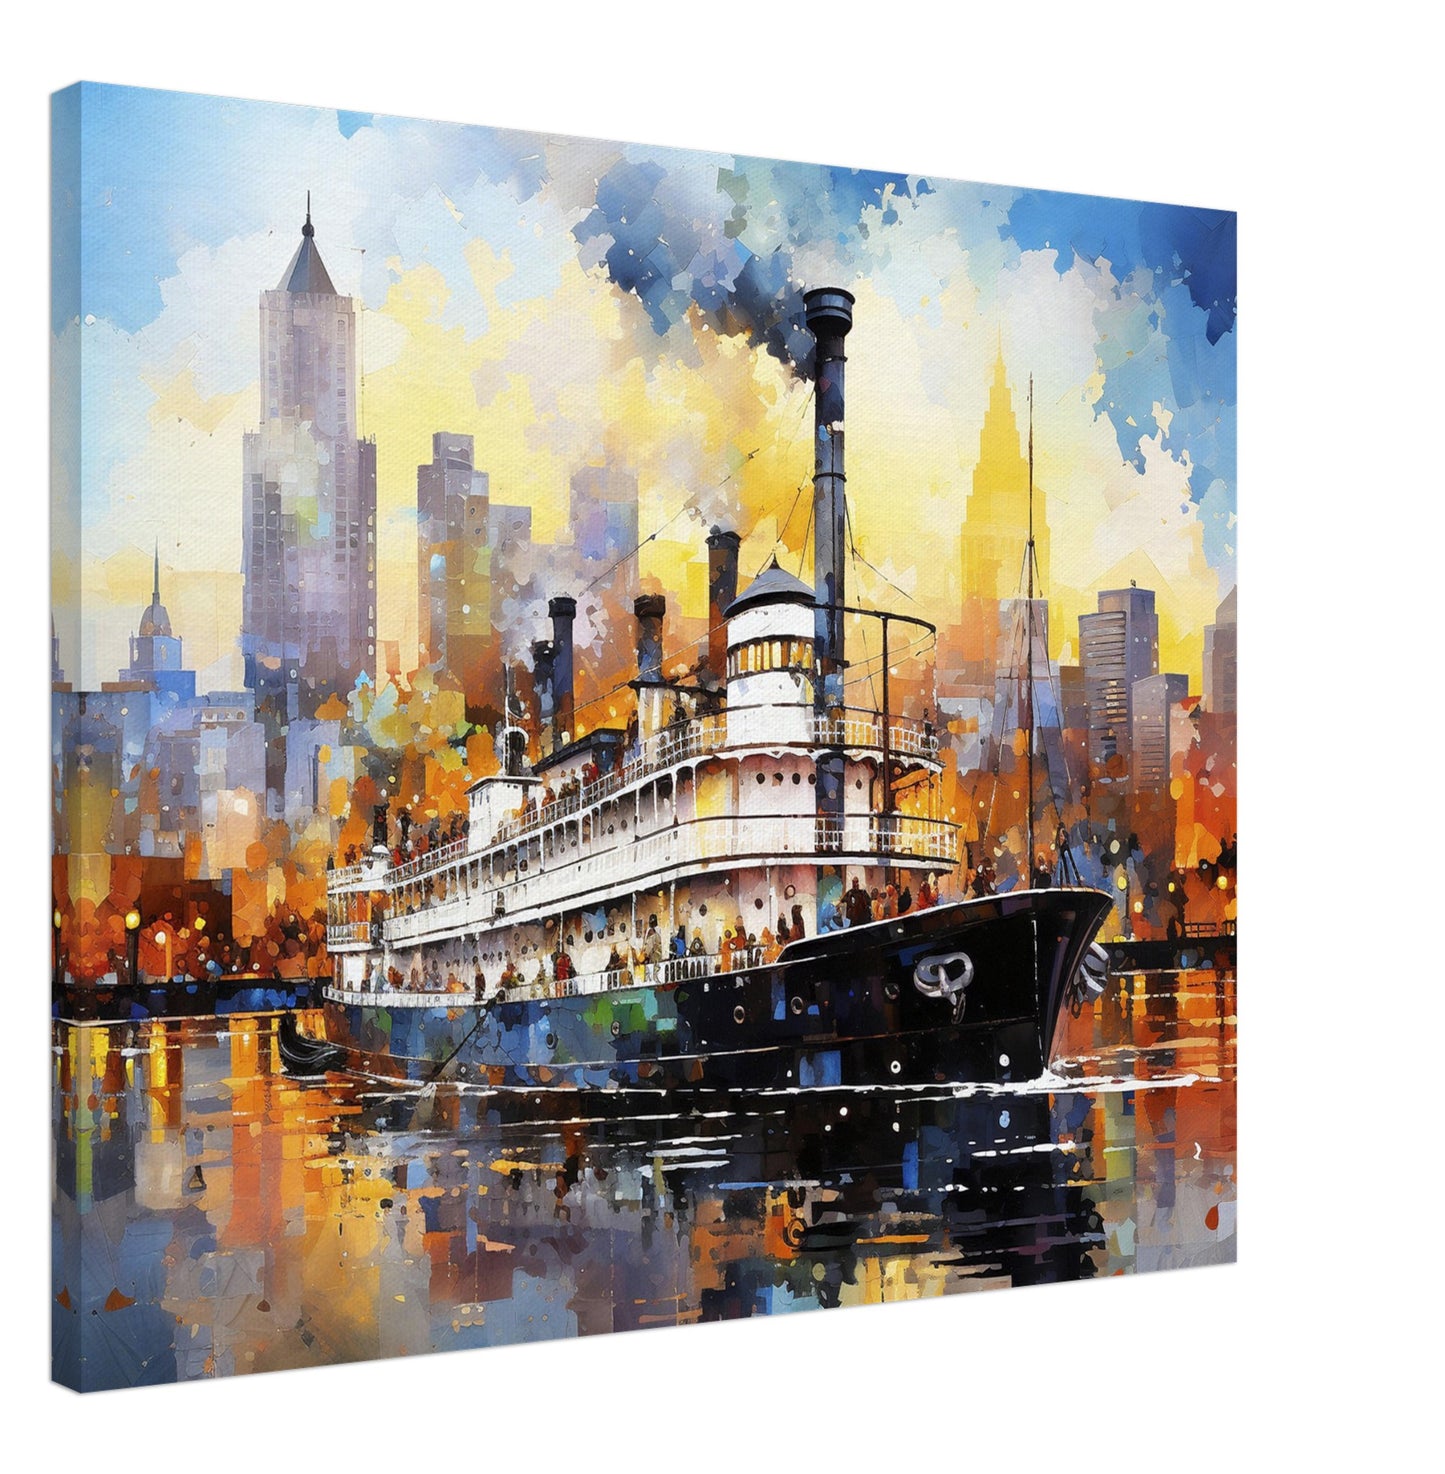 New Orleans - Canvas - Steam Boat Cruising